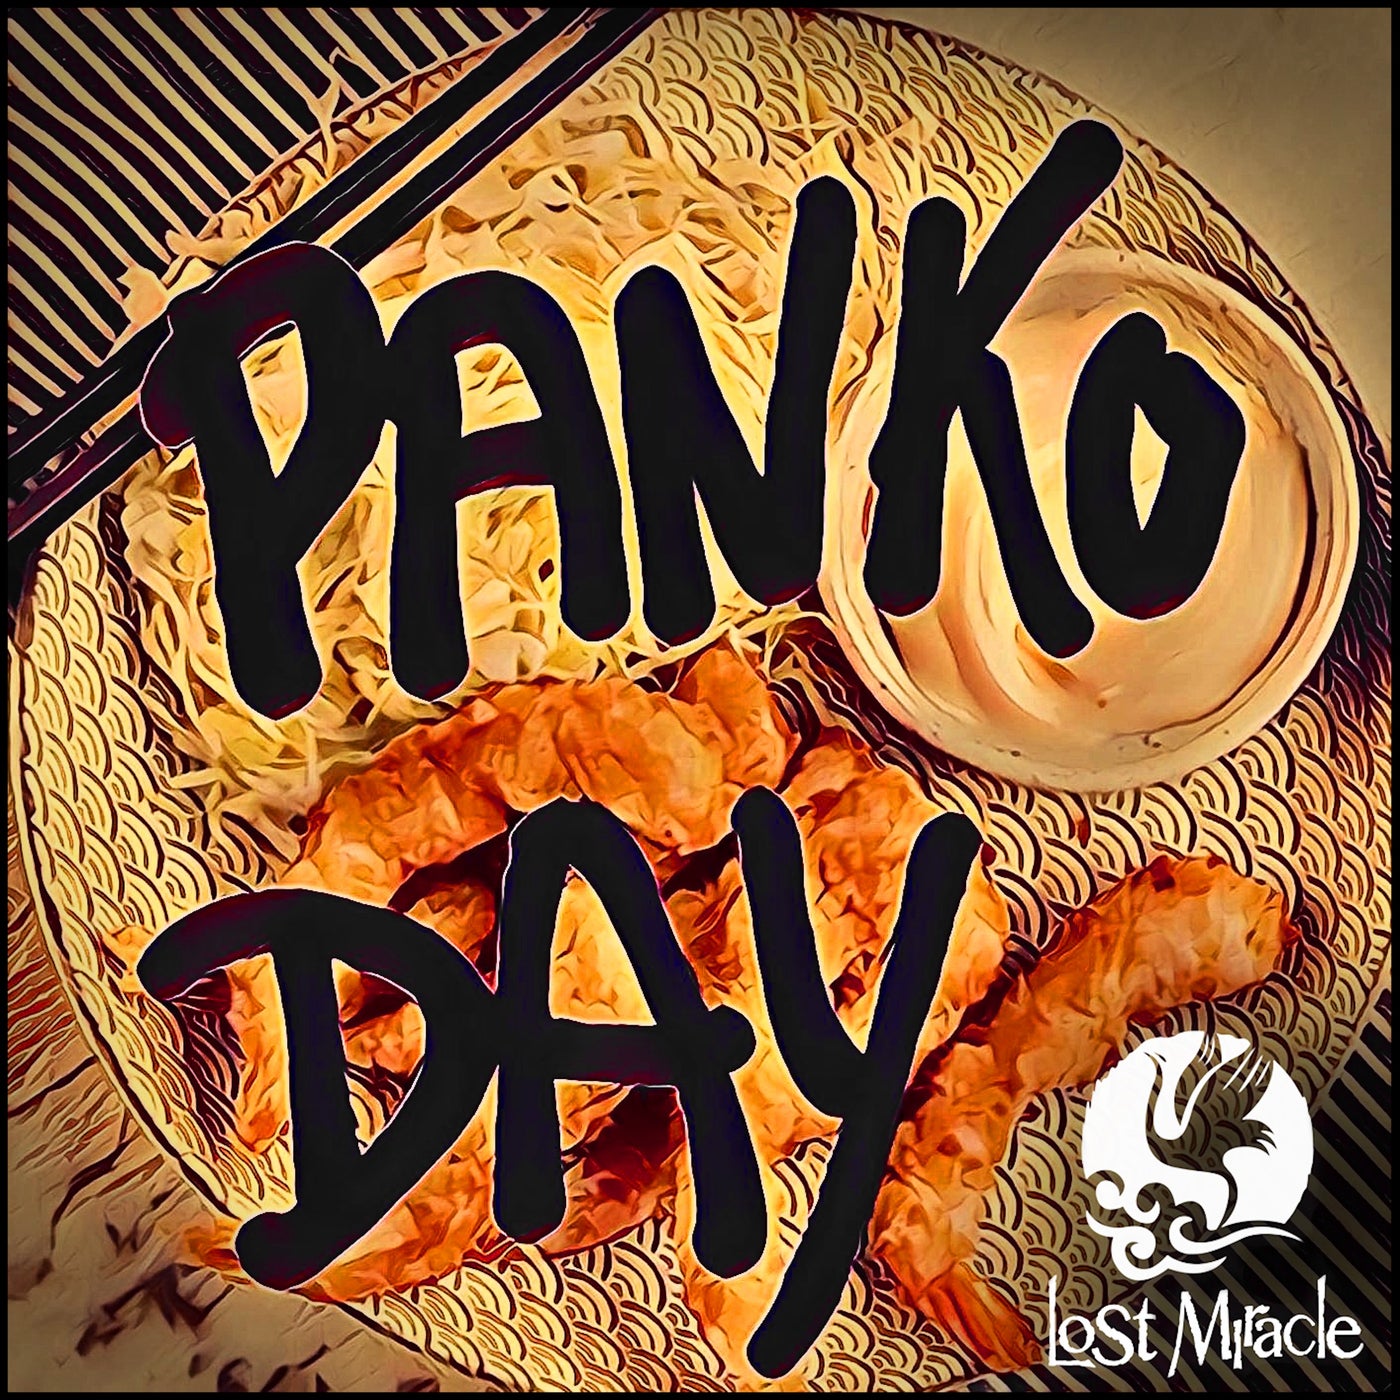 Panko Day (Extended Mix)